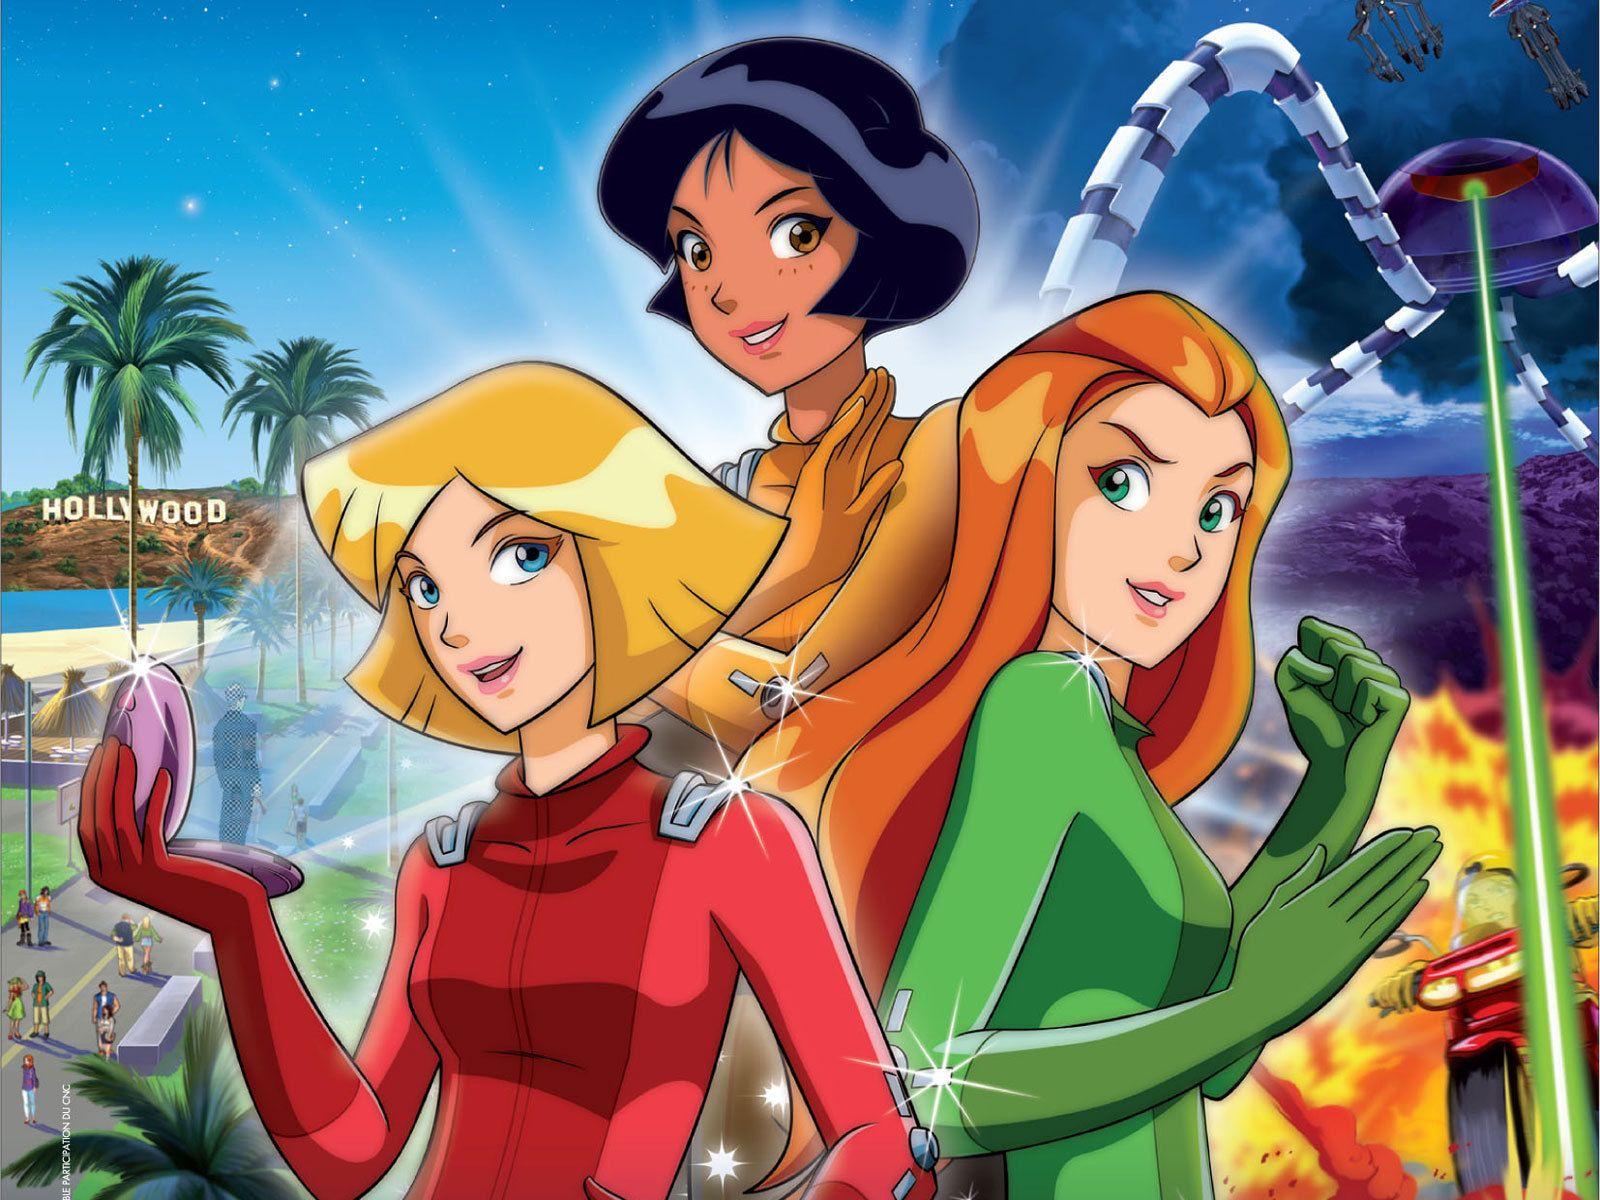 Wallpaper Totally Spies 23240183 1600. Totally